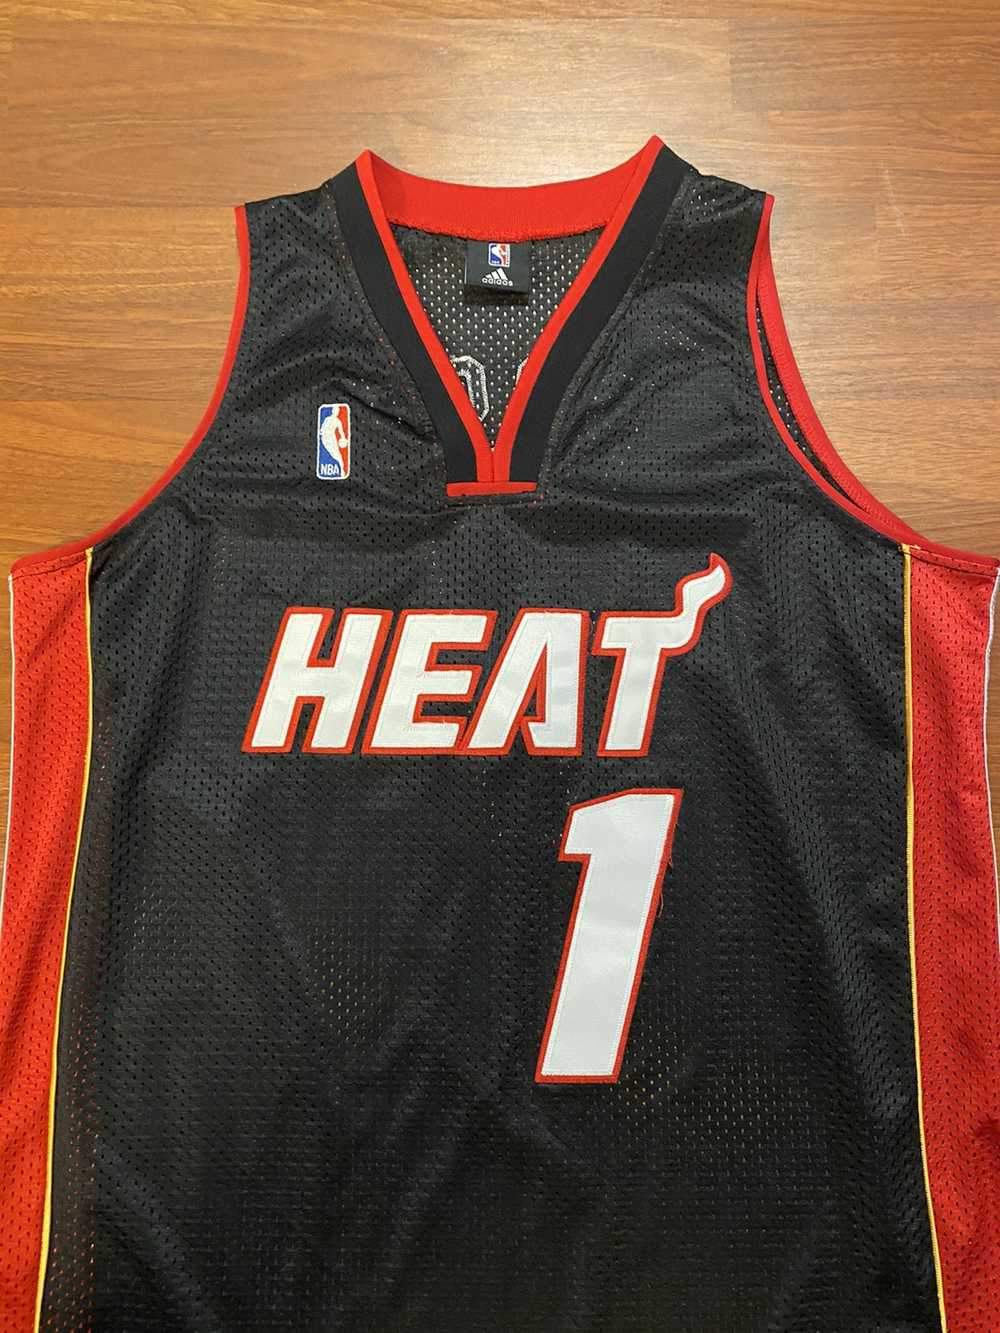 MIAMI HEAT DWYANE WADE JERSEY #3 NBA SIZE EXTRA LARGE VINTAGE ADIDAS 27in x  20in